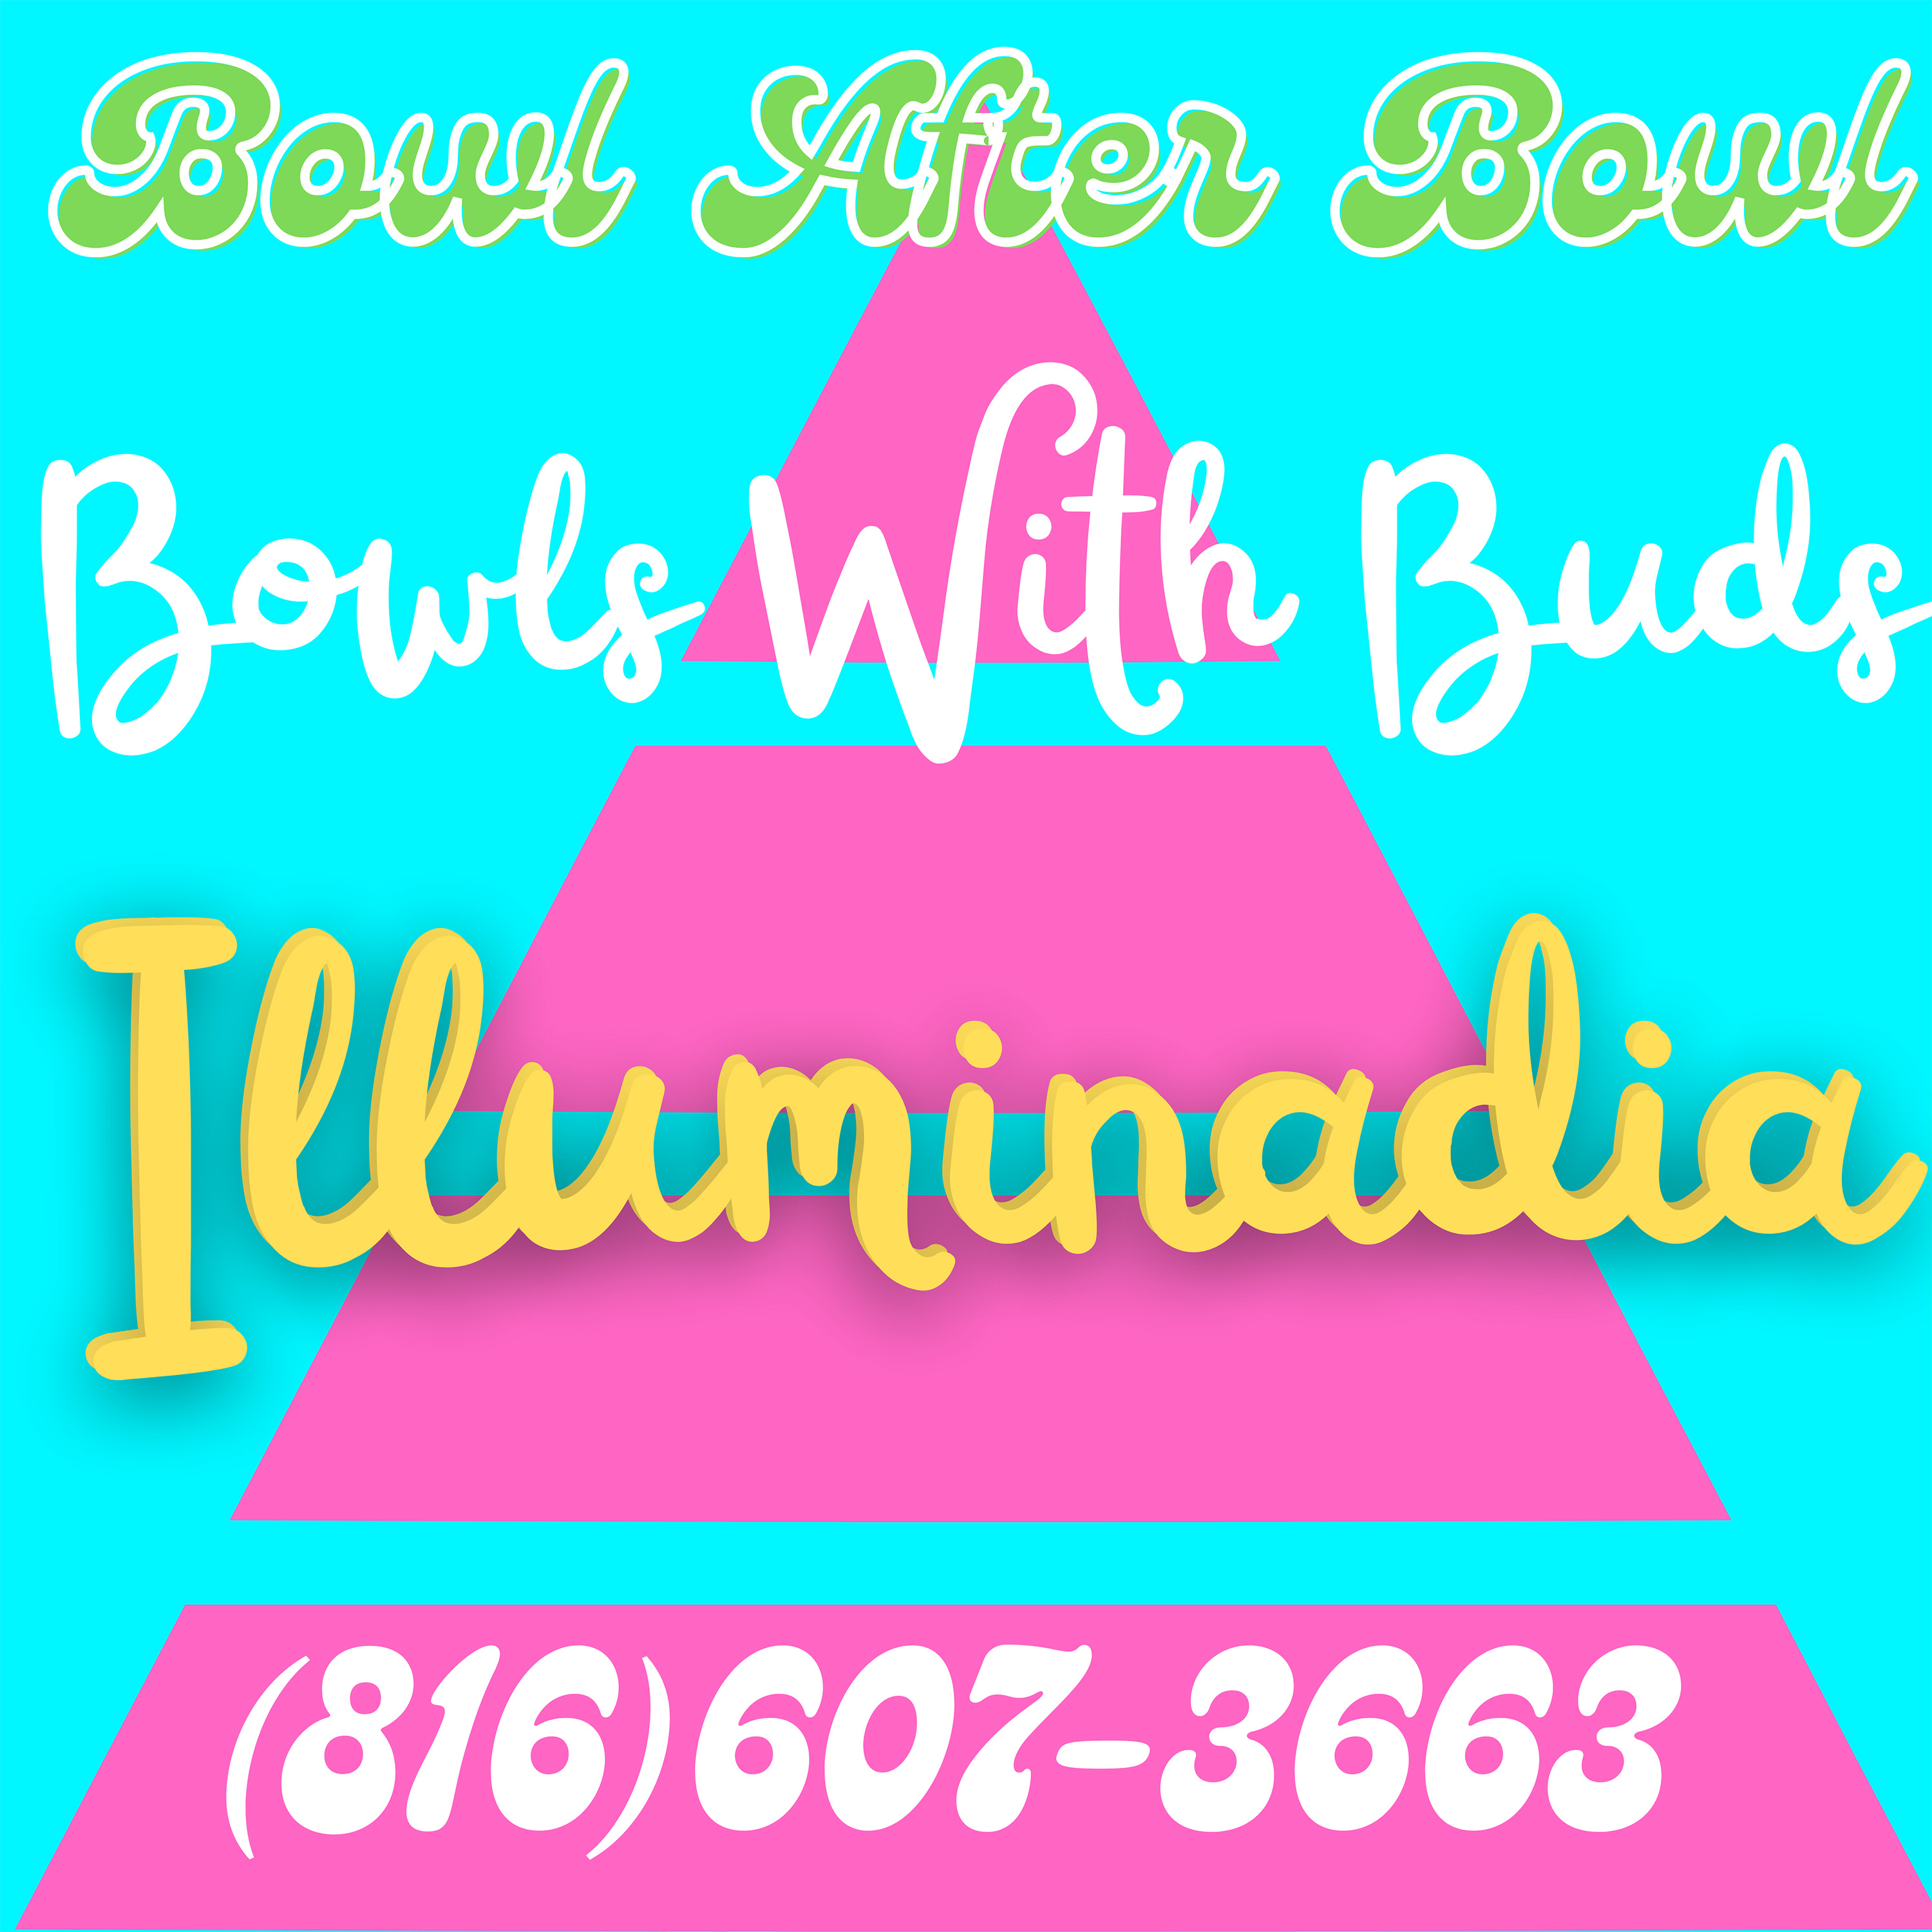 Bowl After Bowl Episode 166 ★ Bowls With Buds ★ Illuminadia